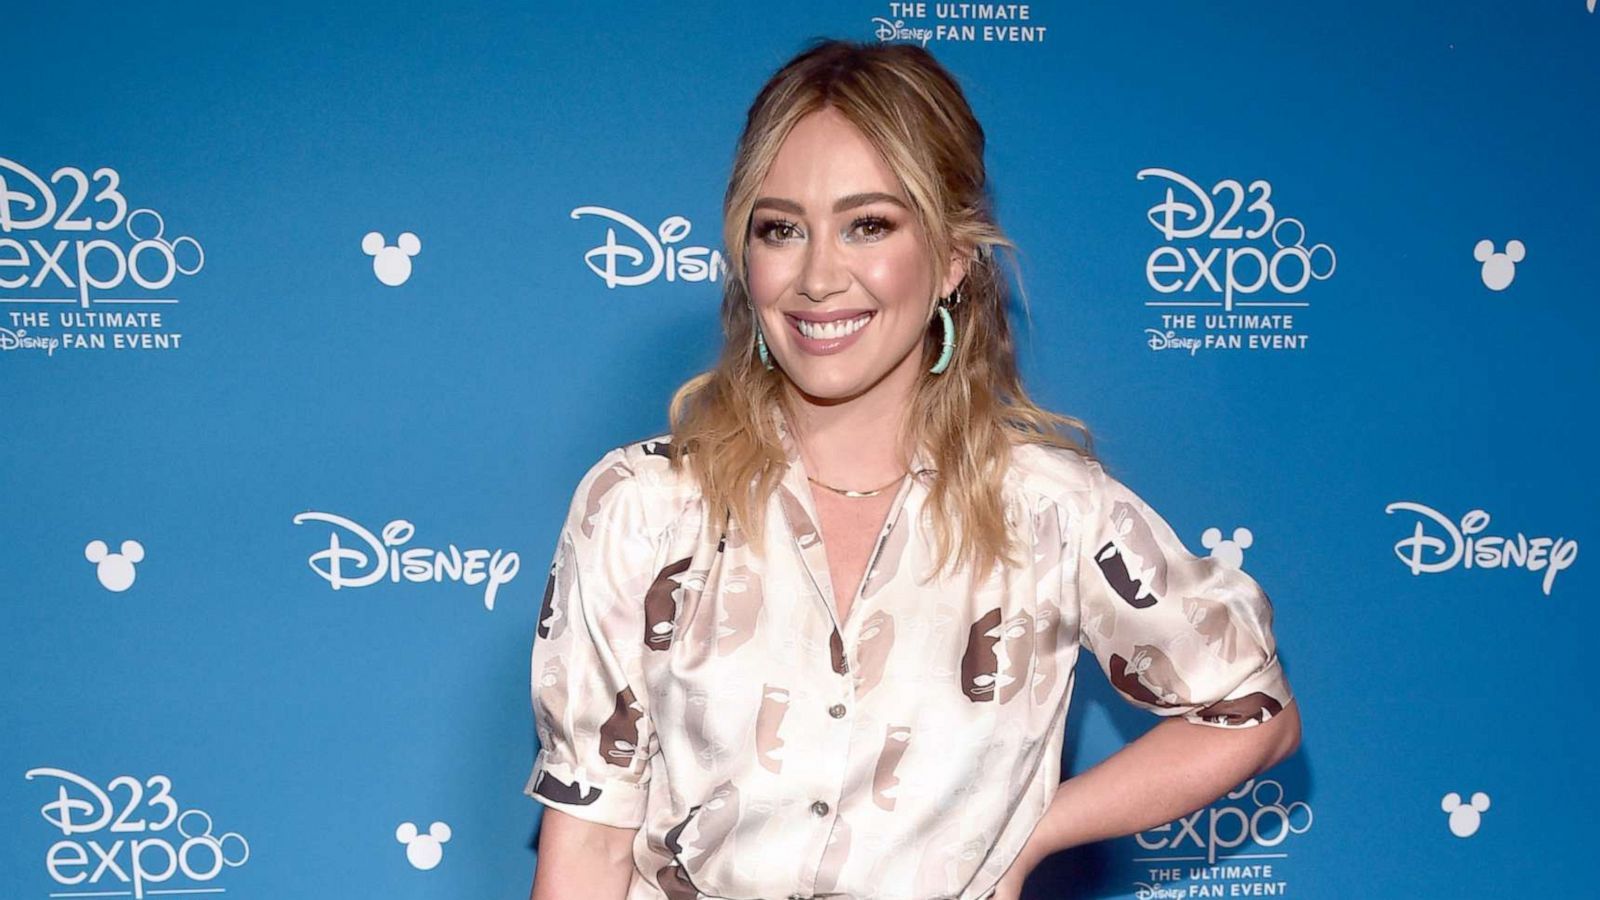 Hilary Duff releases new music for the 1st time in 4 years